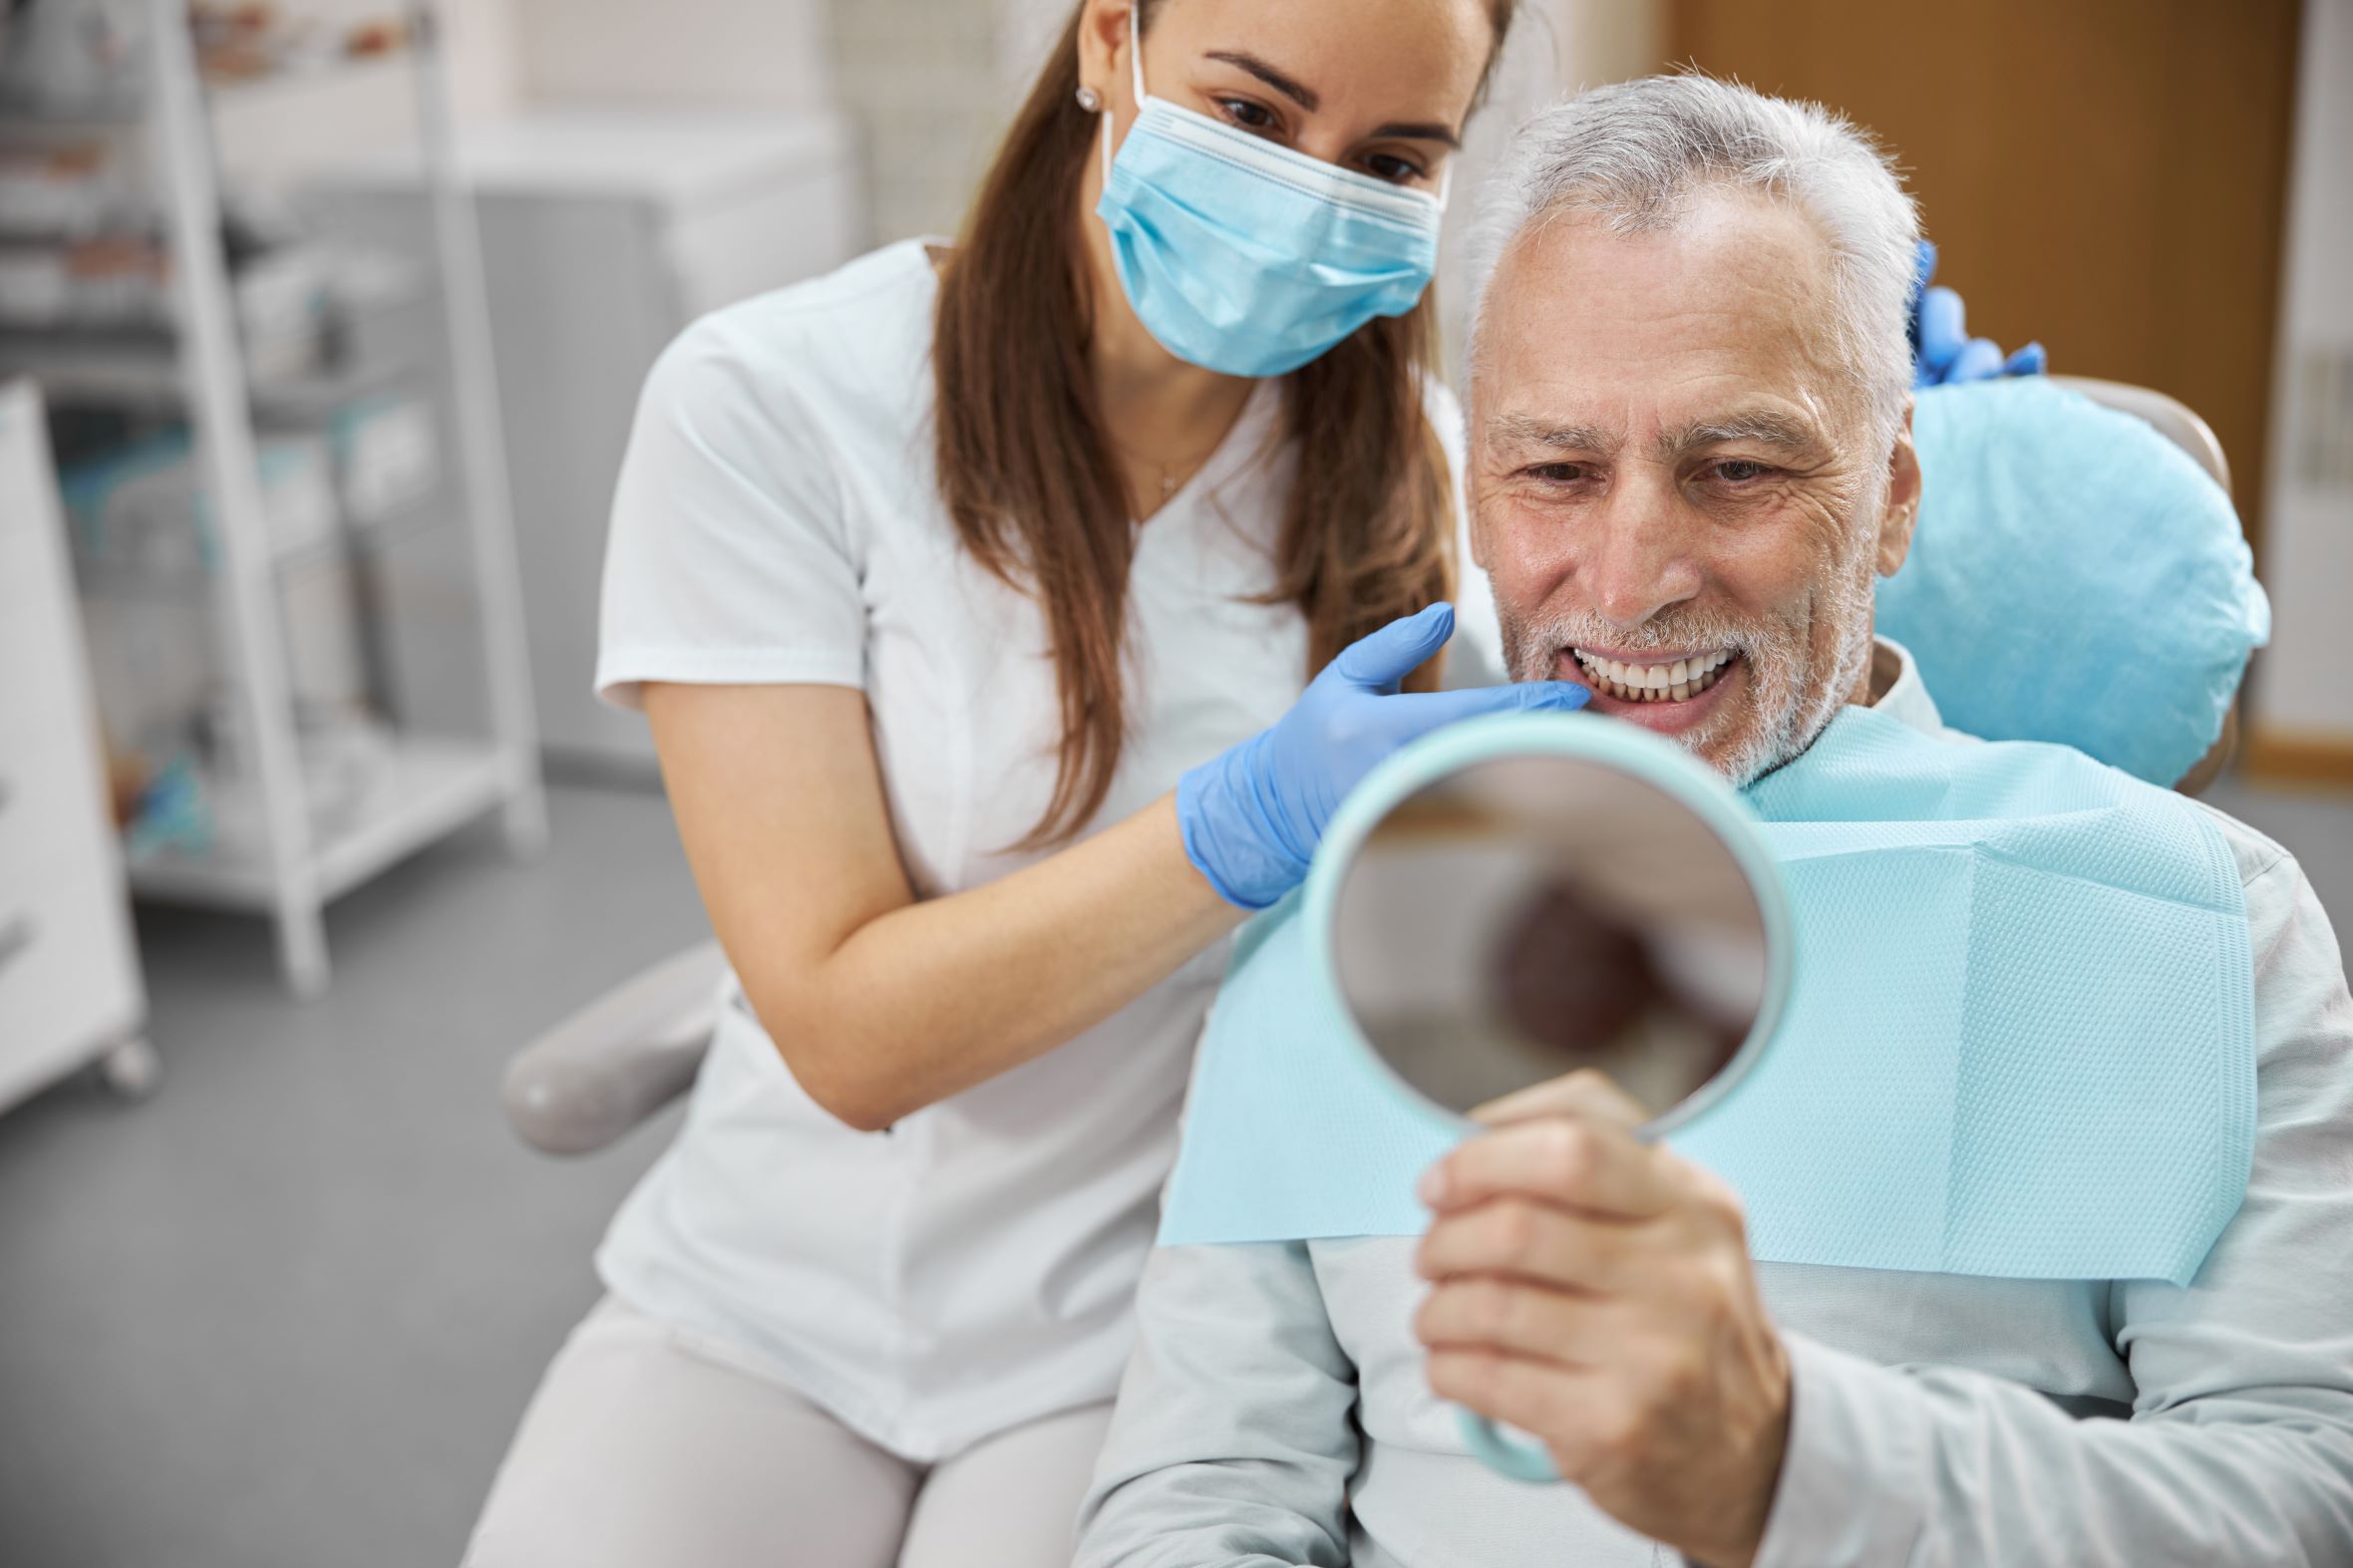 cosmetic dentistry could help your smile age gracefully